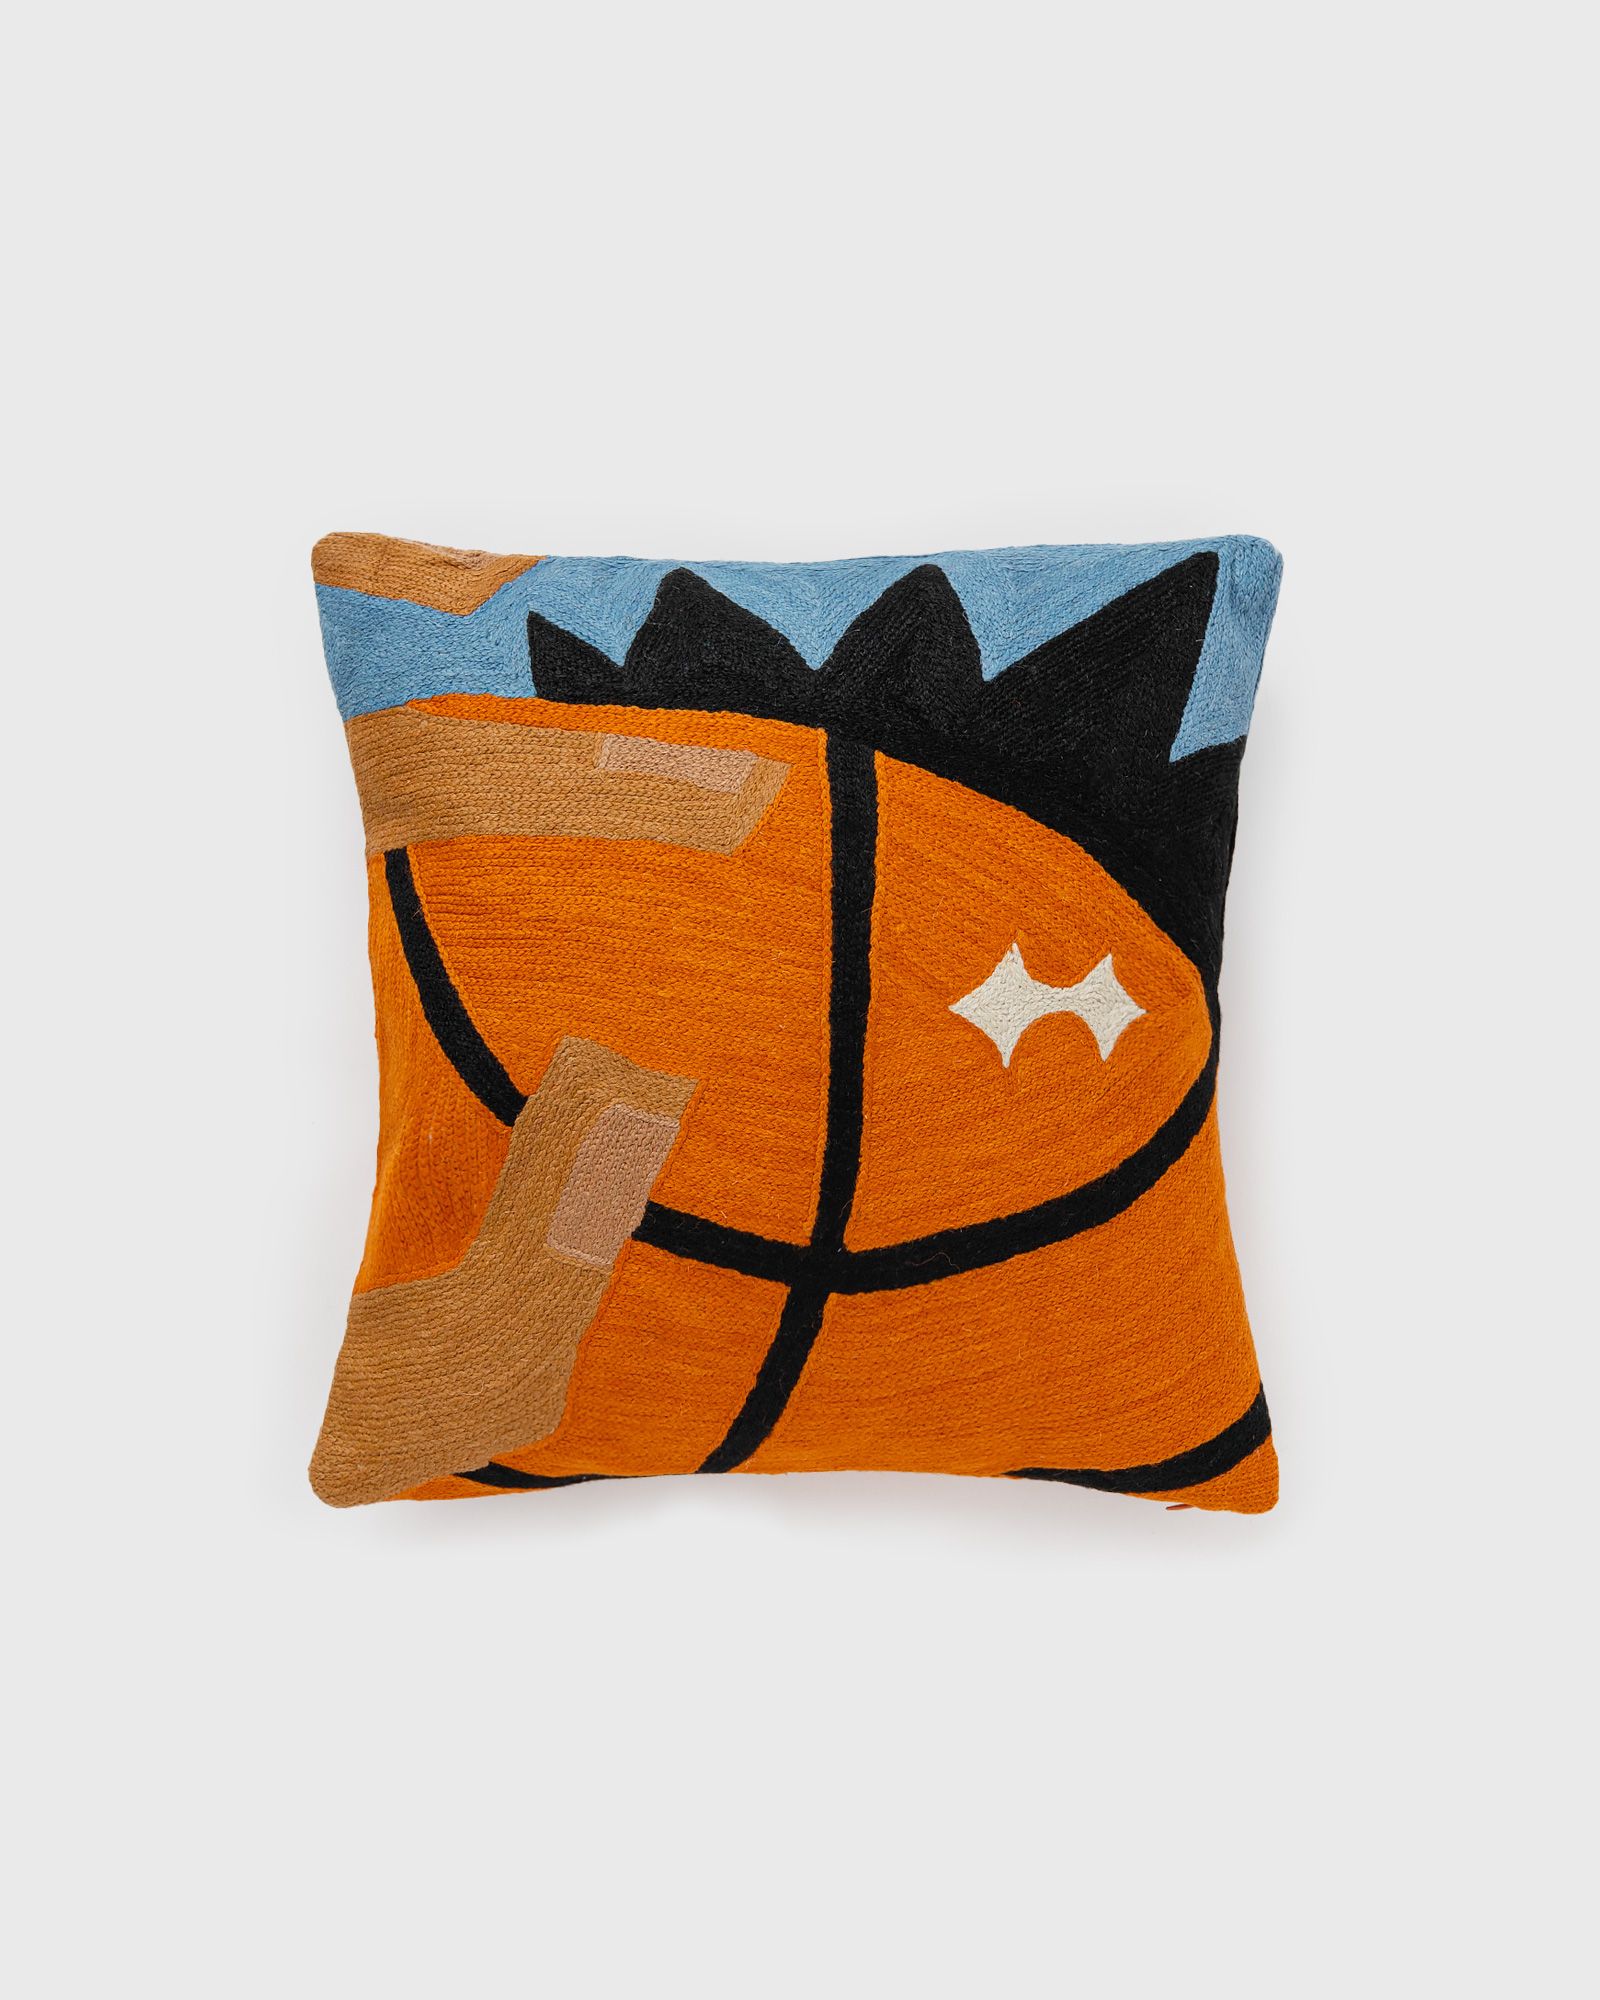 BASKETBALL PILLOW BY SULA